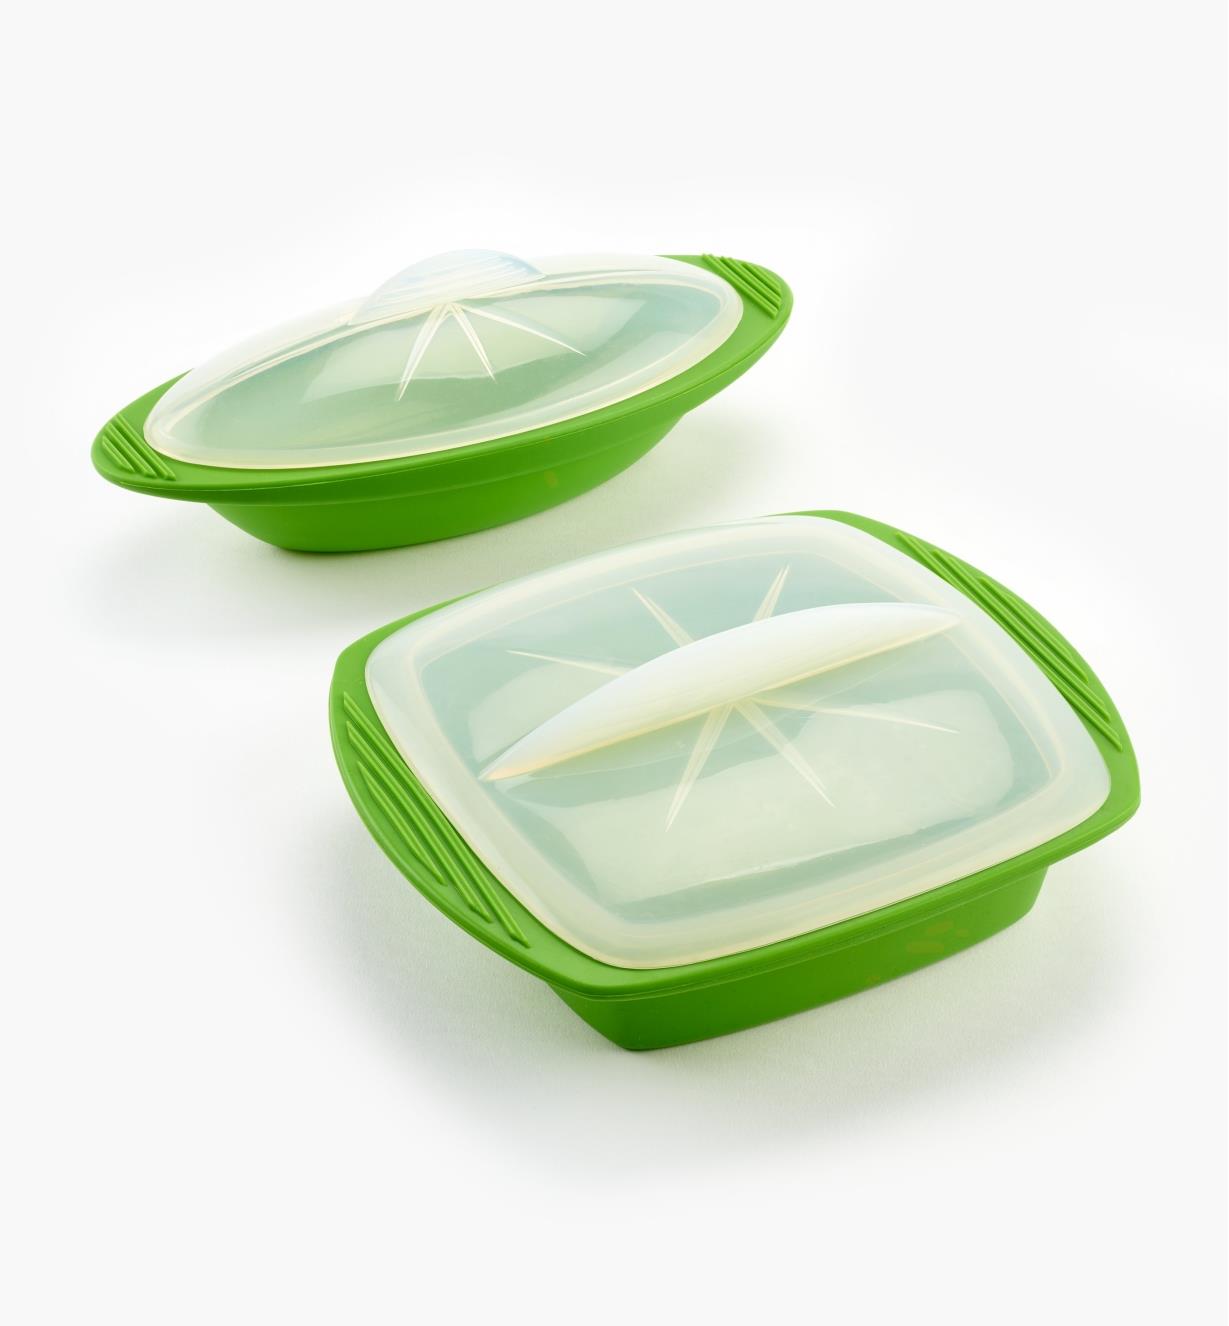 EV580 - Set of 2 Silicone Steam Cookers